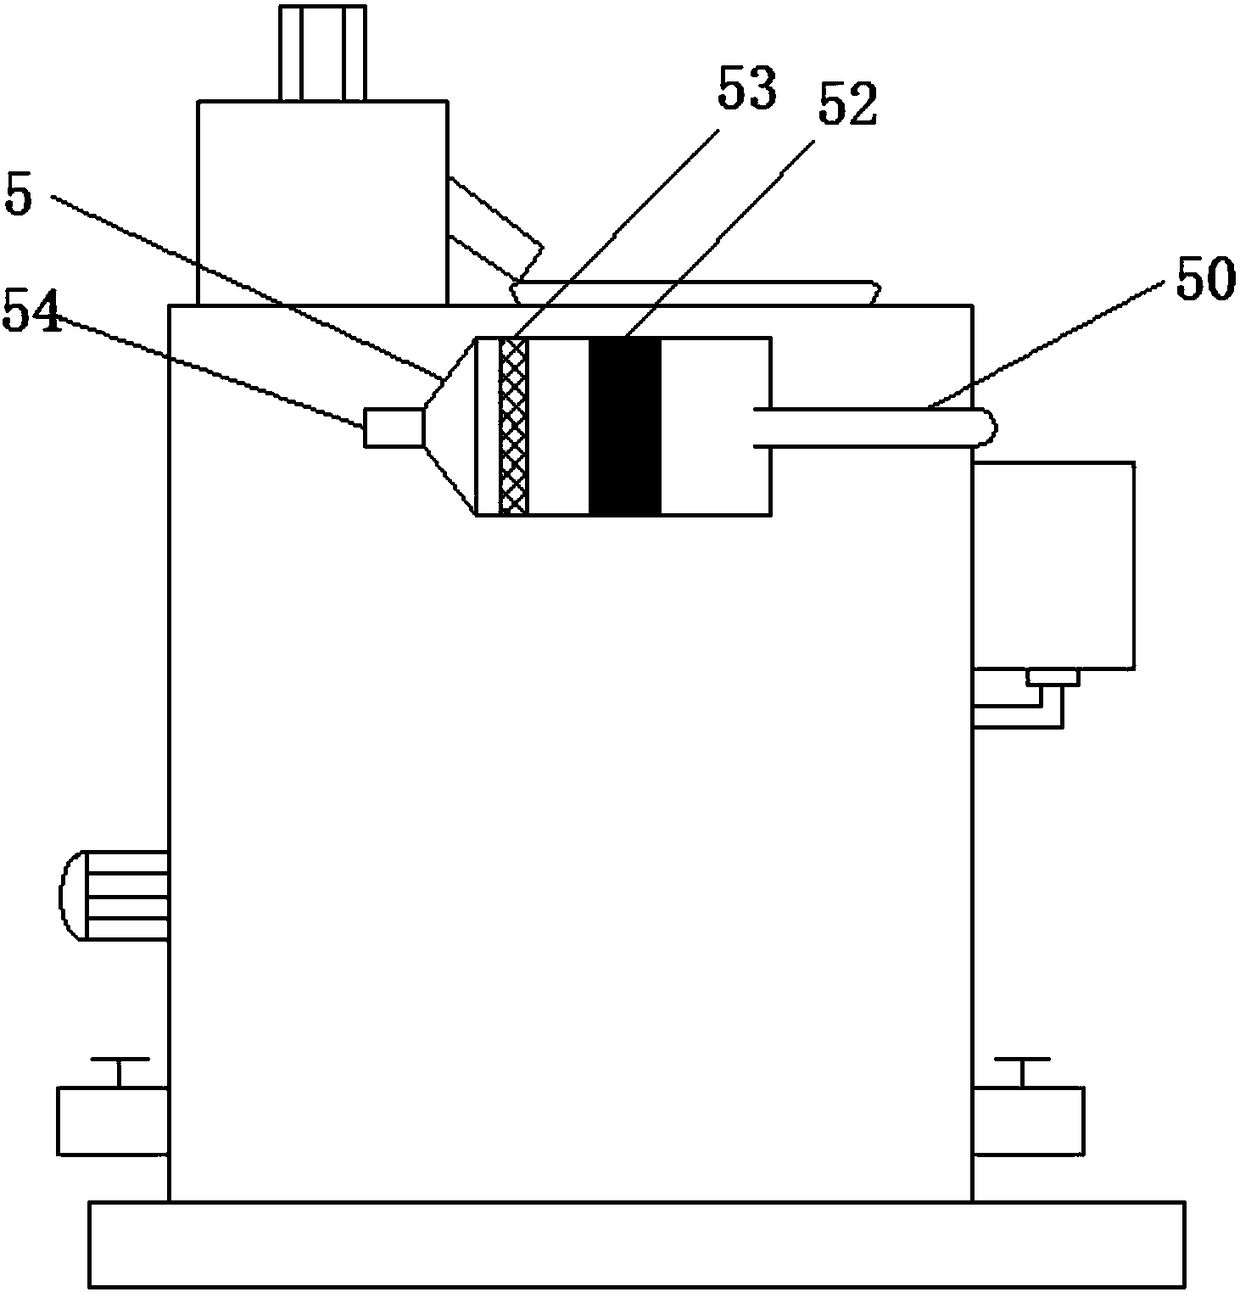 Batch processing device for pharmaceutical wastes